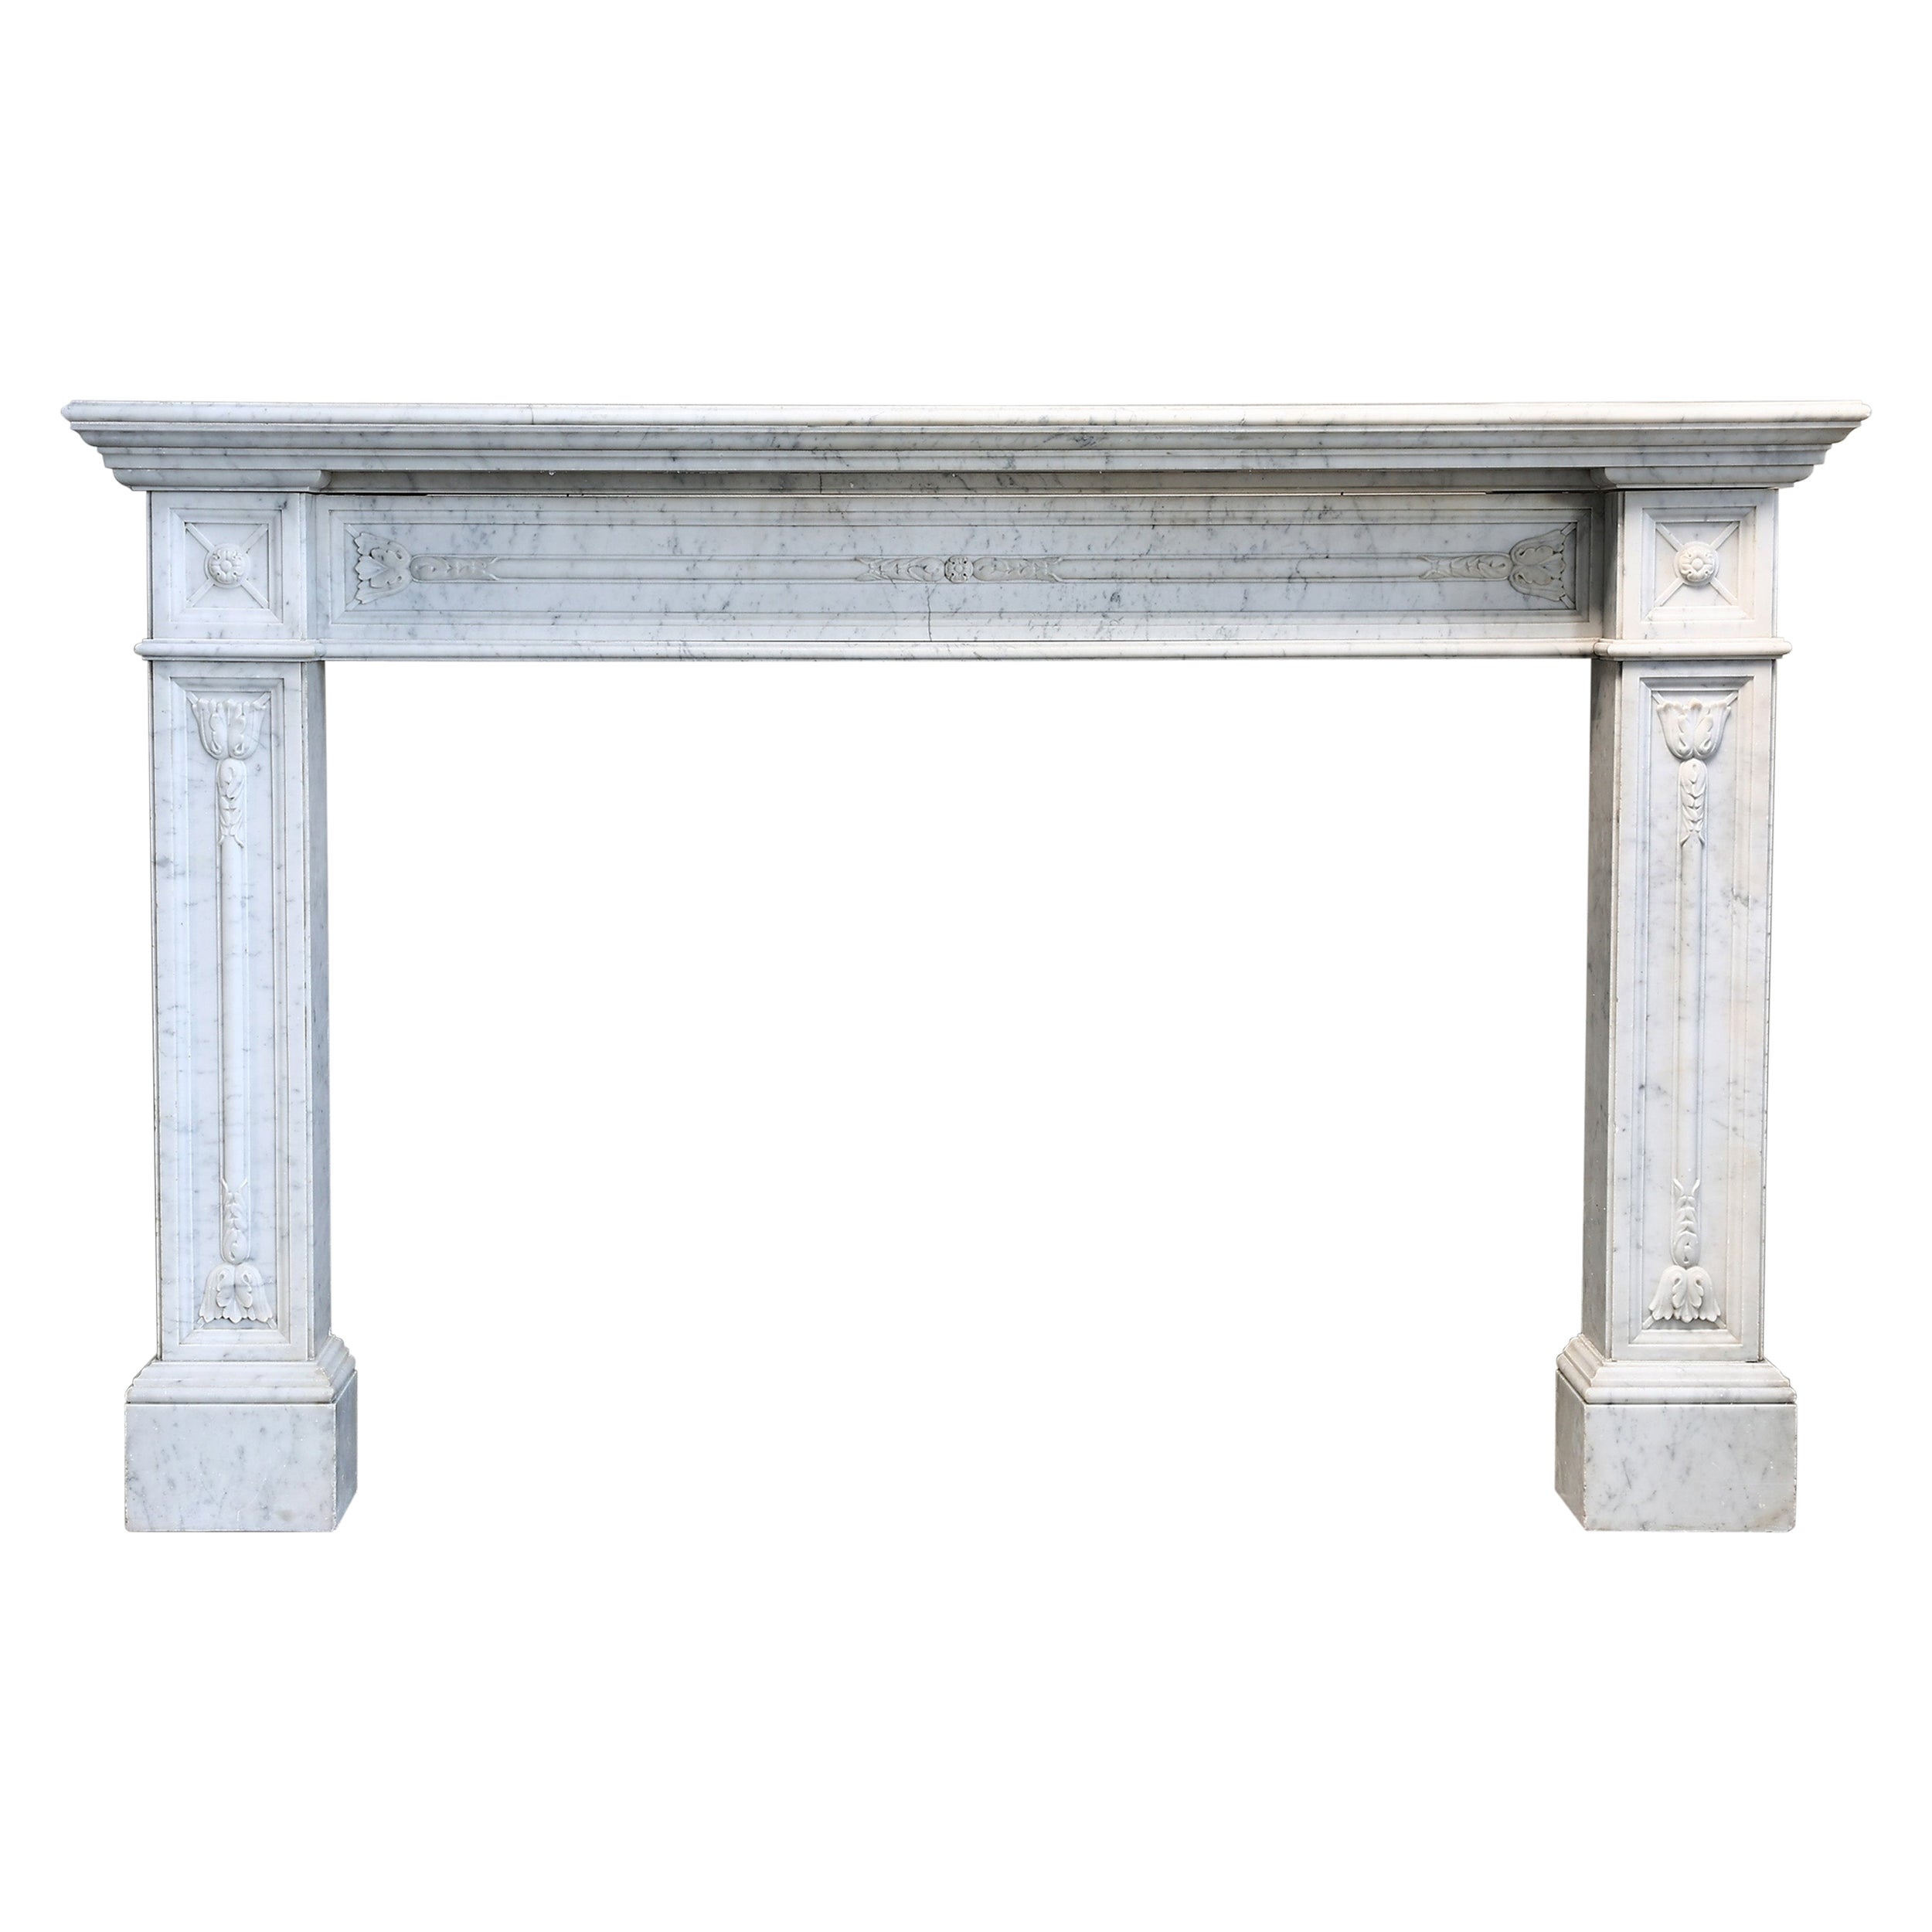 Louis XVI Style Fireplace of Arabescato Marble from the 19th Century